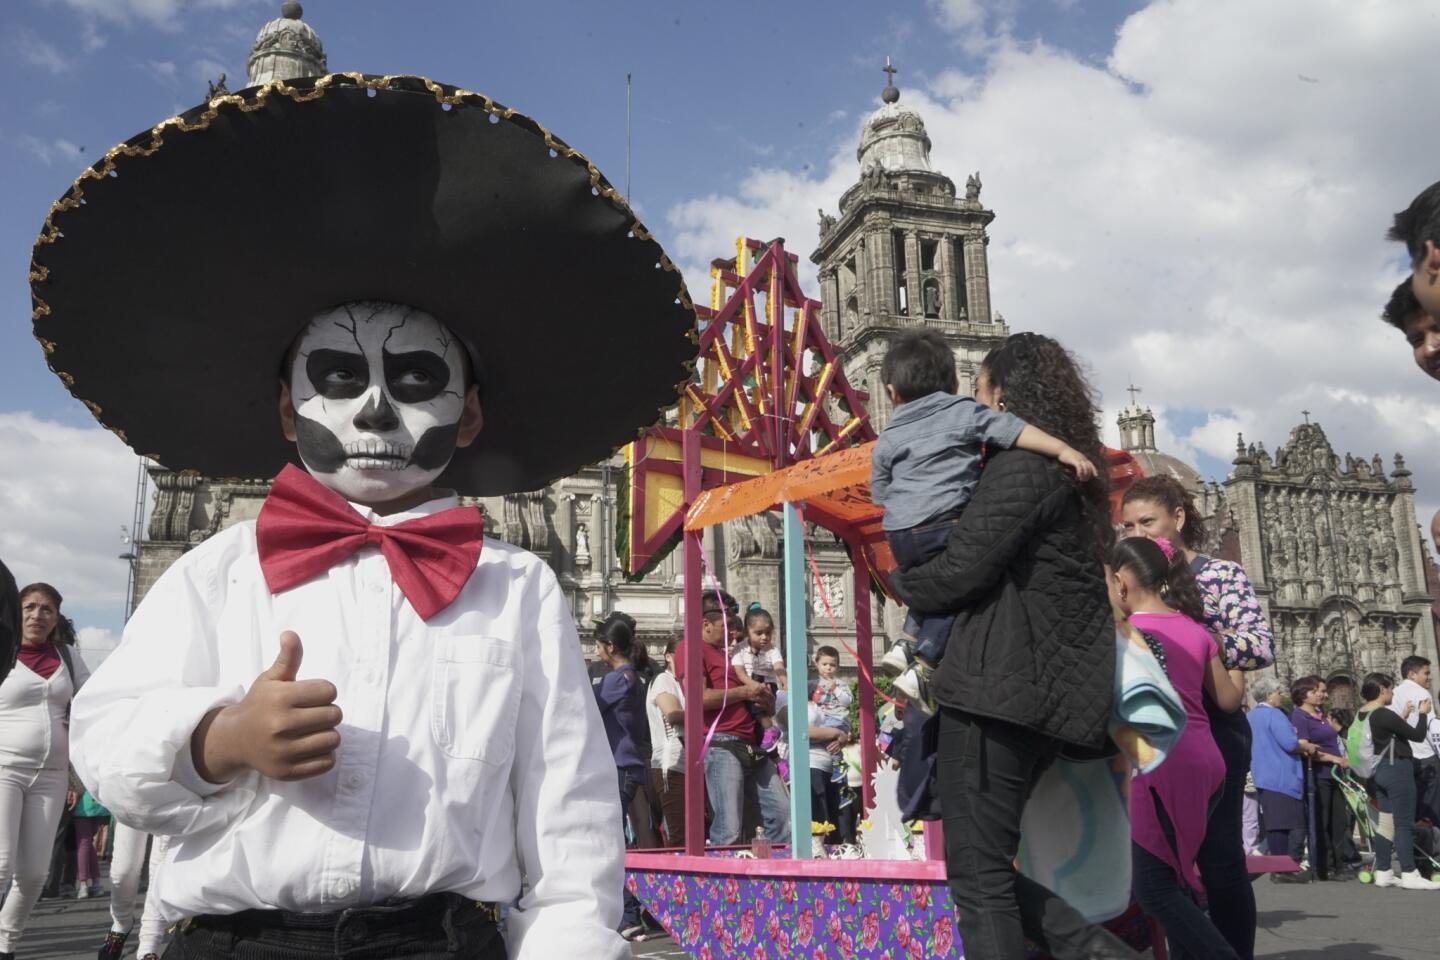 Dilan Bautista, 4, joins the festivities during Mexico City’s first Day of the Dead parade. More than 250,000 people attended.